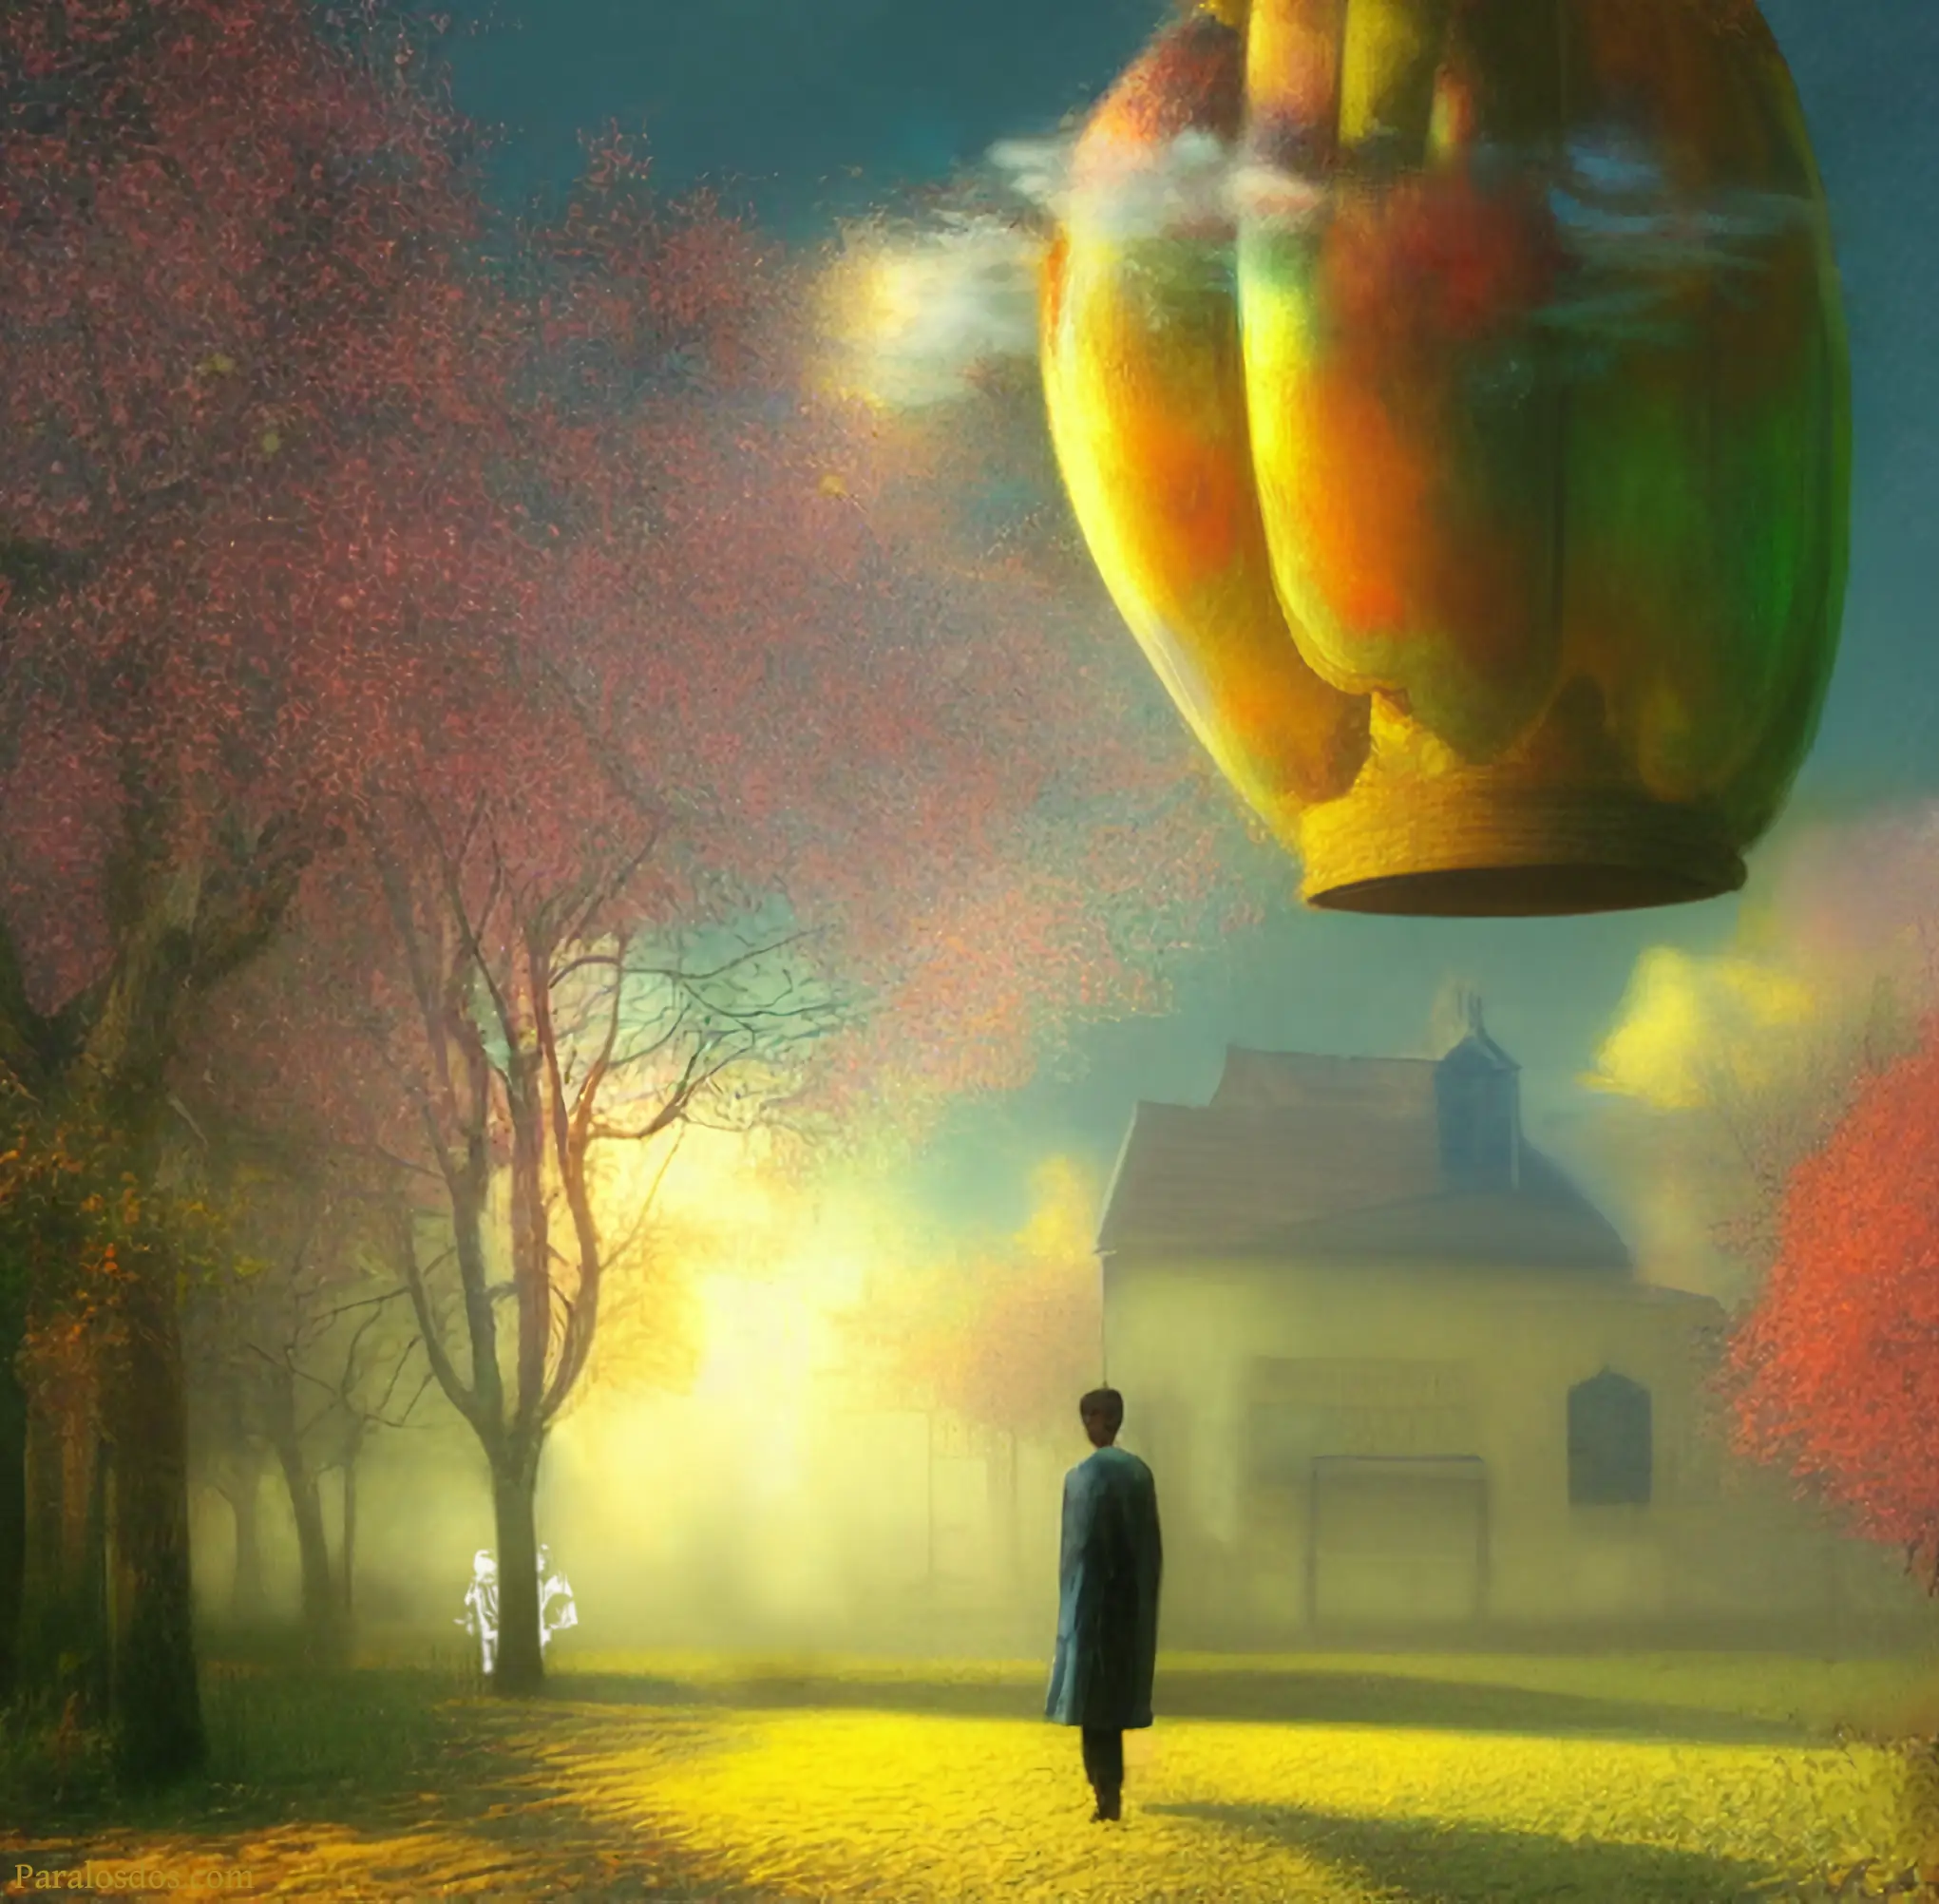 A fantastical artistic rendering of a figure on a brightly lit day walking towards an old house in a field. Above the house is a weird and colourful hot air balloon without a gondola.